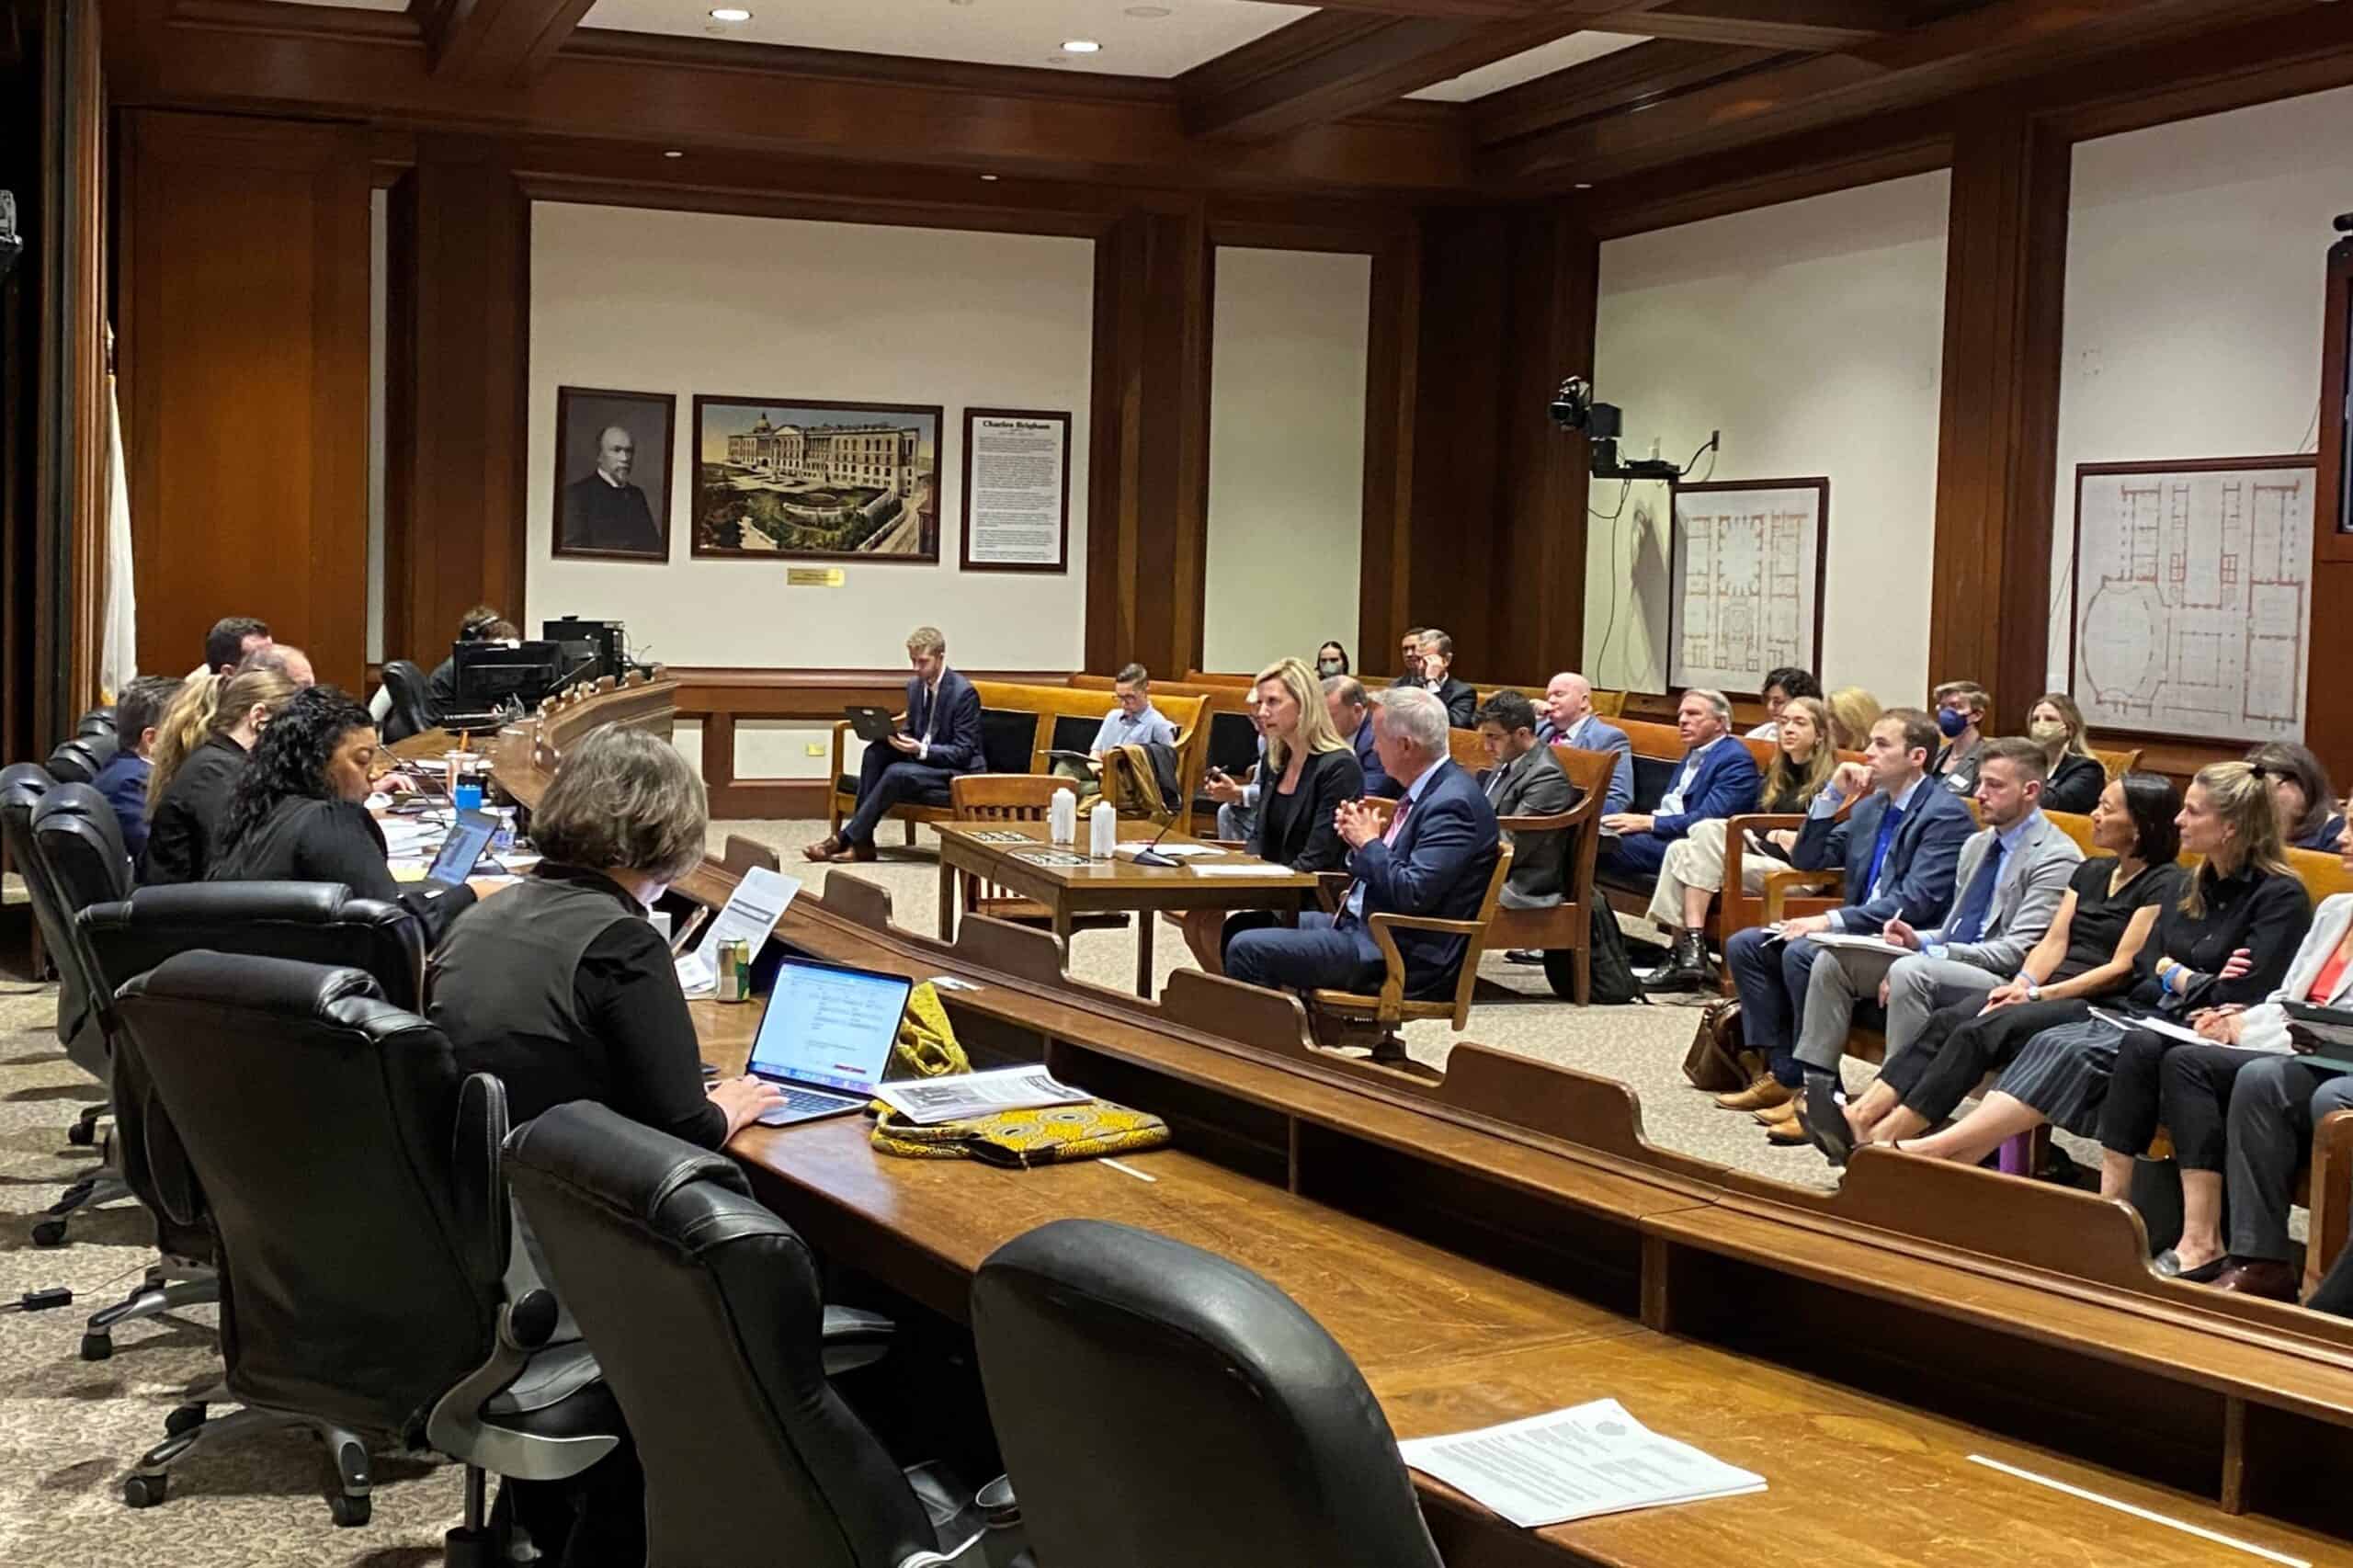 A hearing room in the Massachusetts State House with seats to the left for legislators and staff, a table in the middle for people testifying (in this case Kendalle Burlin O'Connell and Ed Coppinger), and then benches for guests to sit.